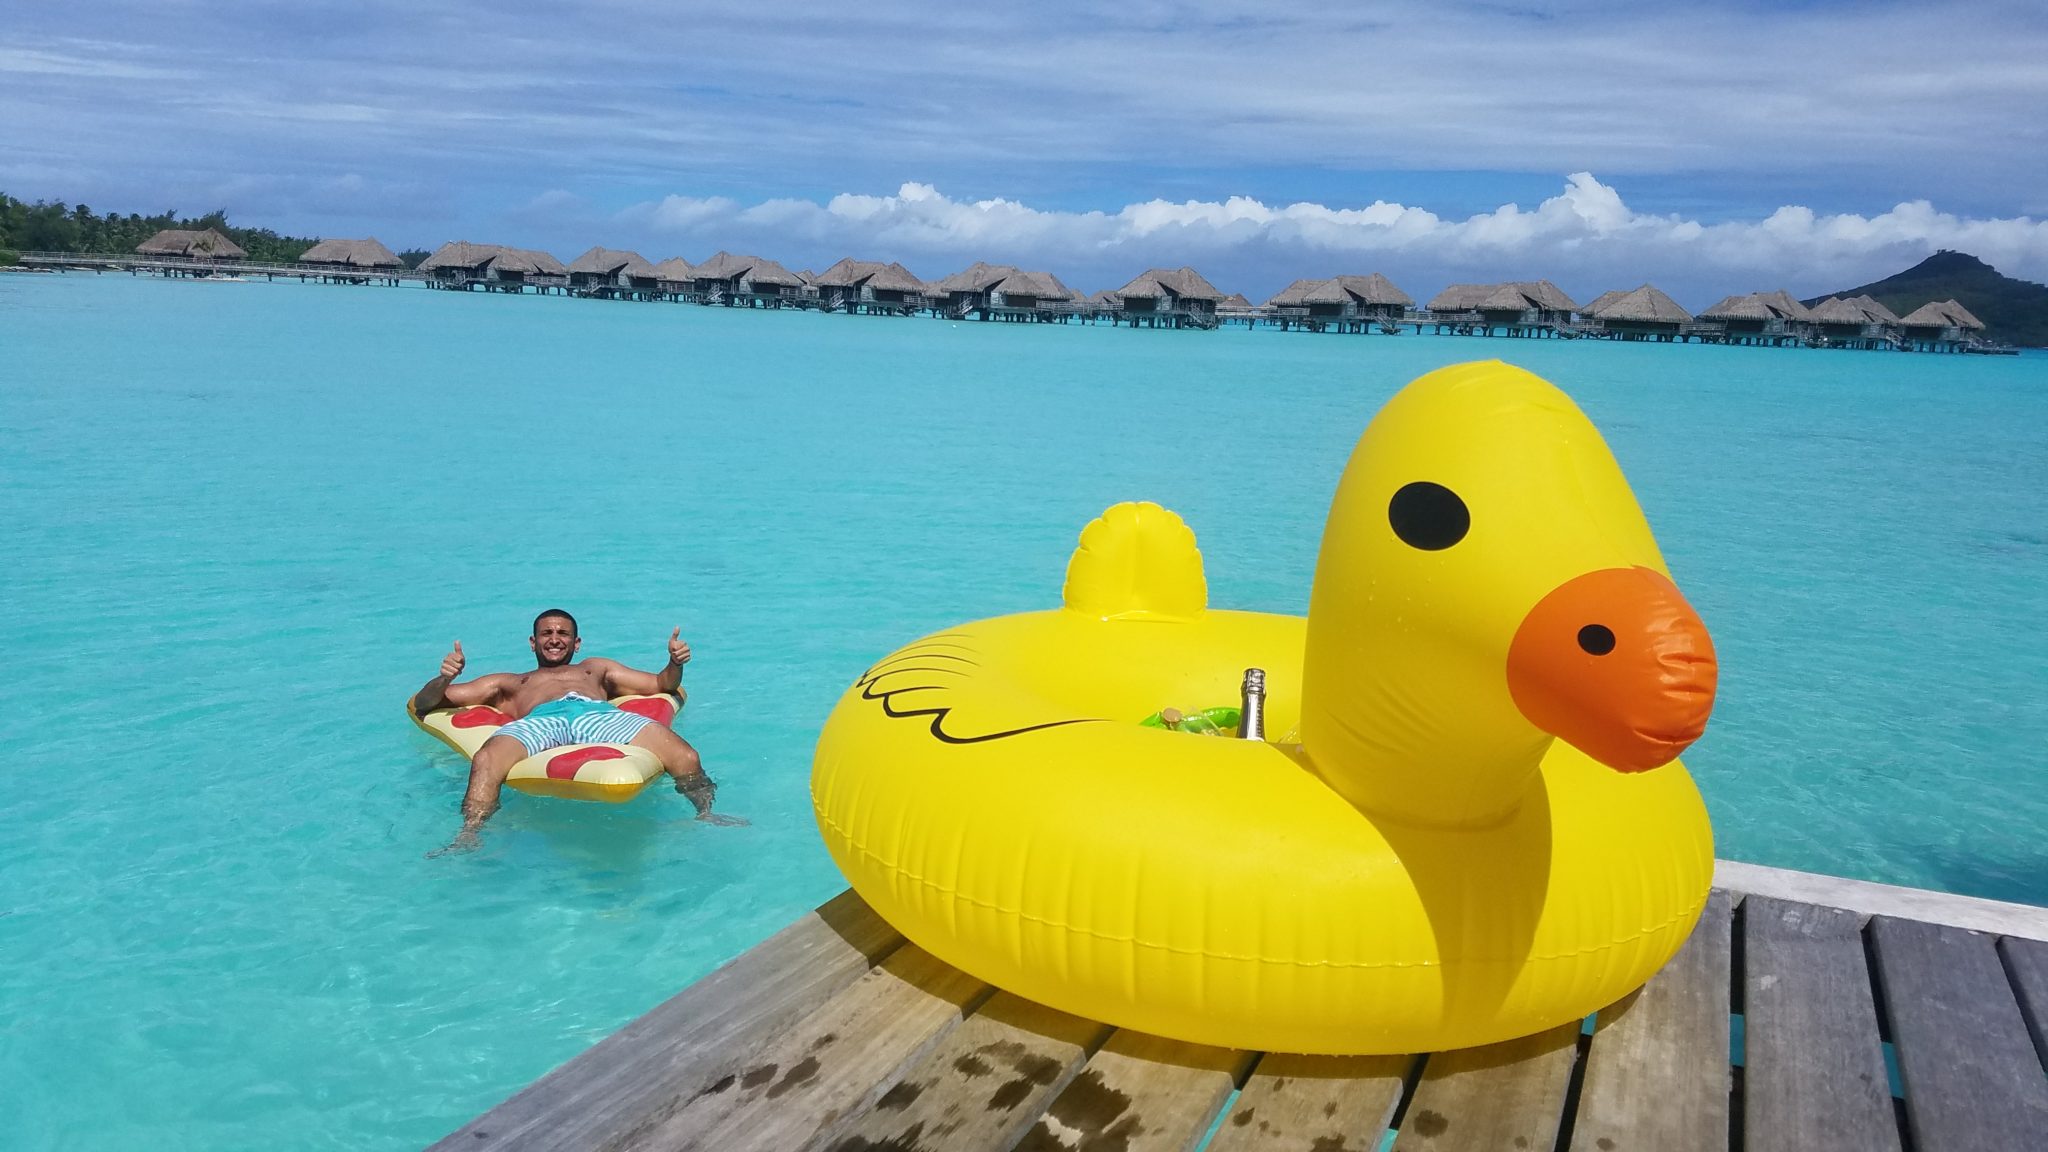 a man floating on a rubber ducky in a pool